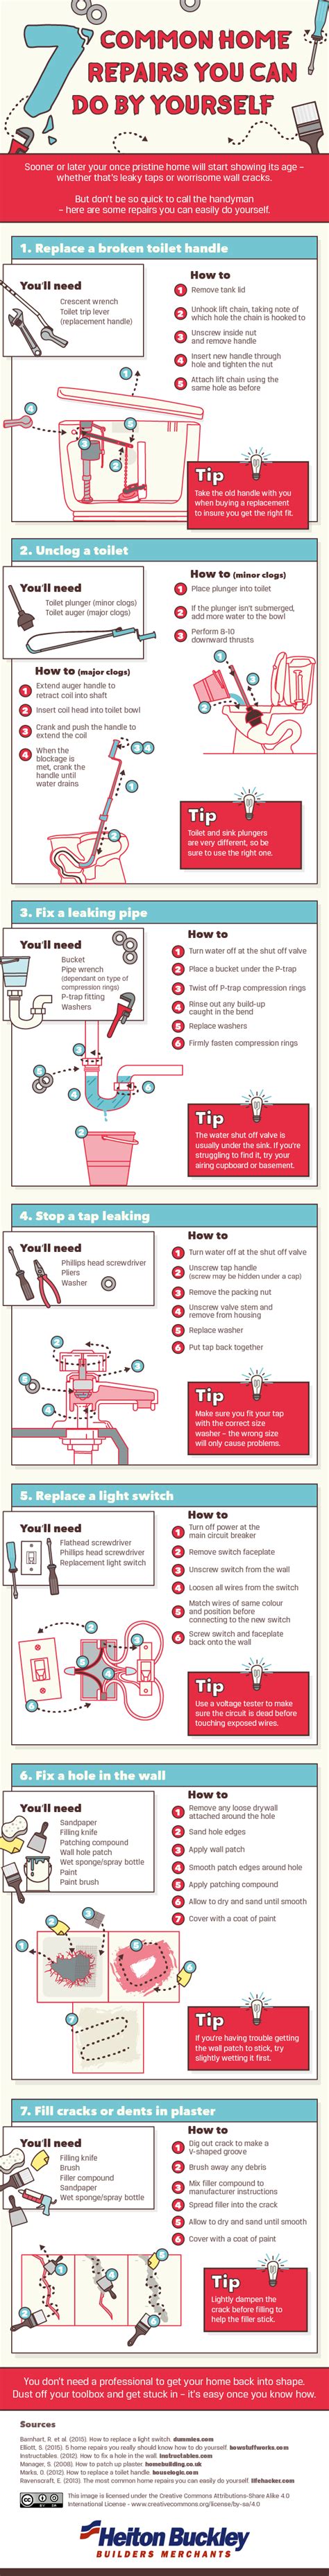 7 Common Repairs You Can Do By Yourself Infographic